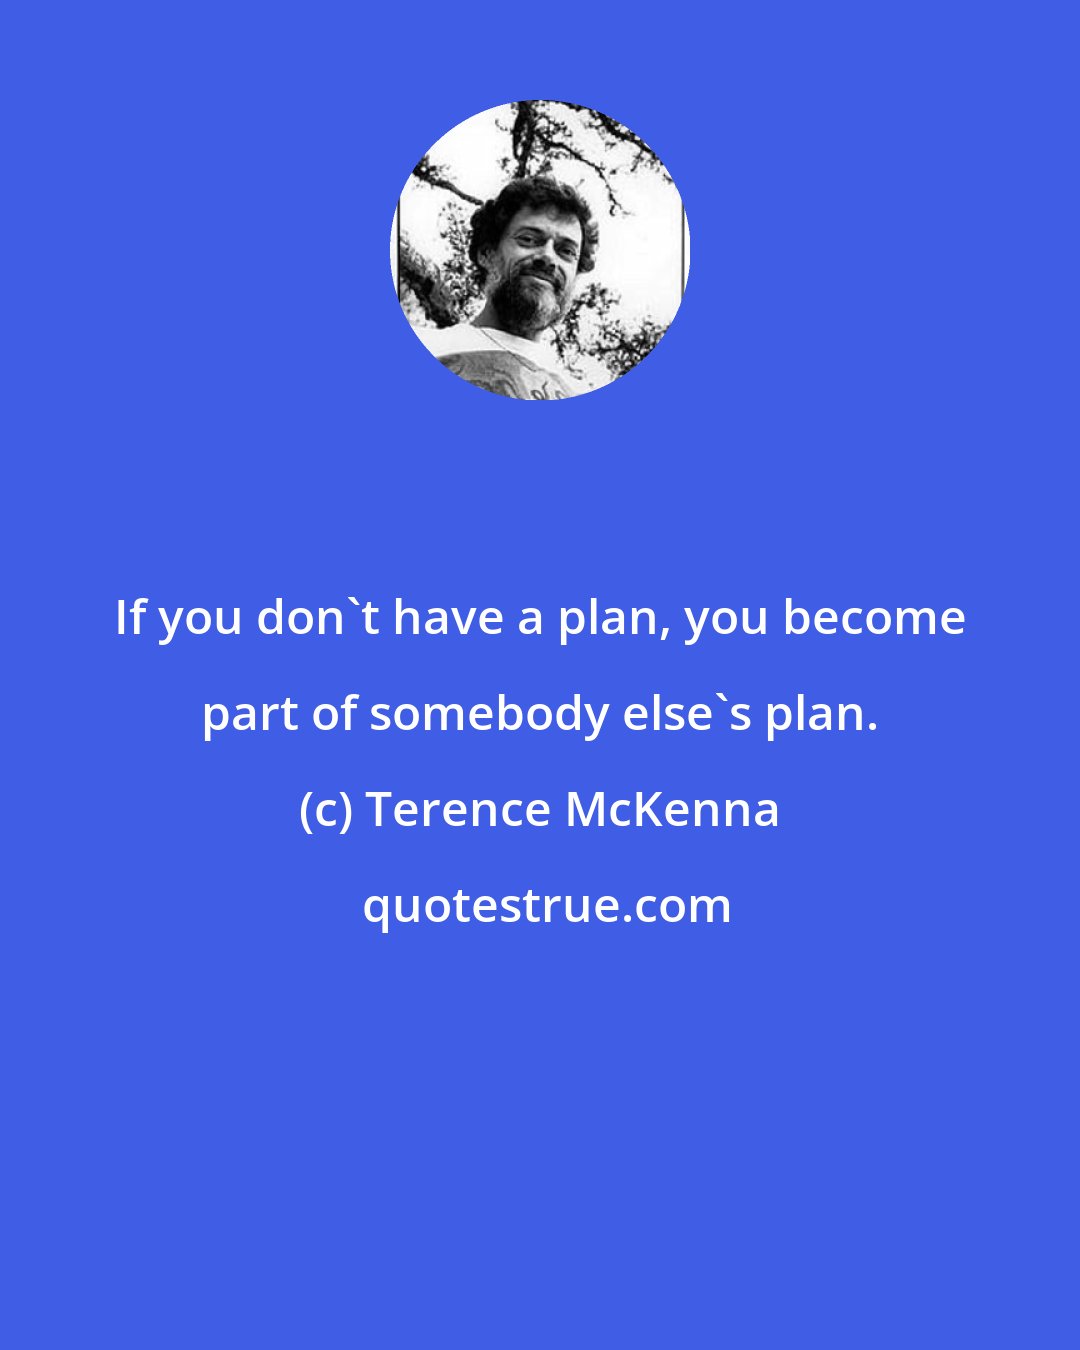 Terence McKenna: If you don't have a plan, you become part of somebody else's plan.